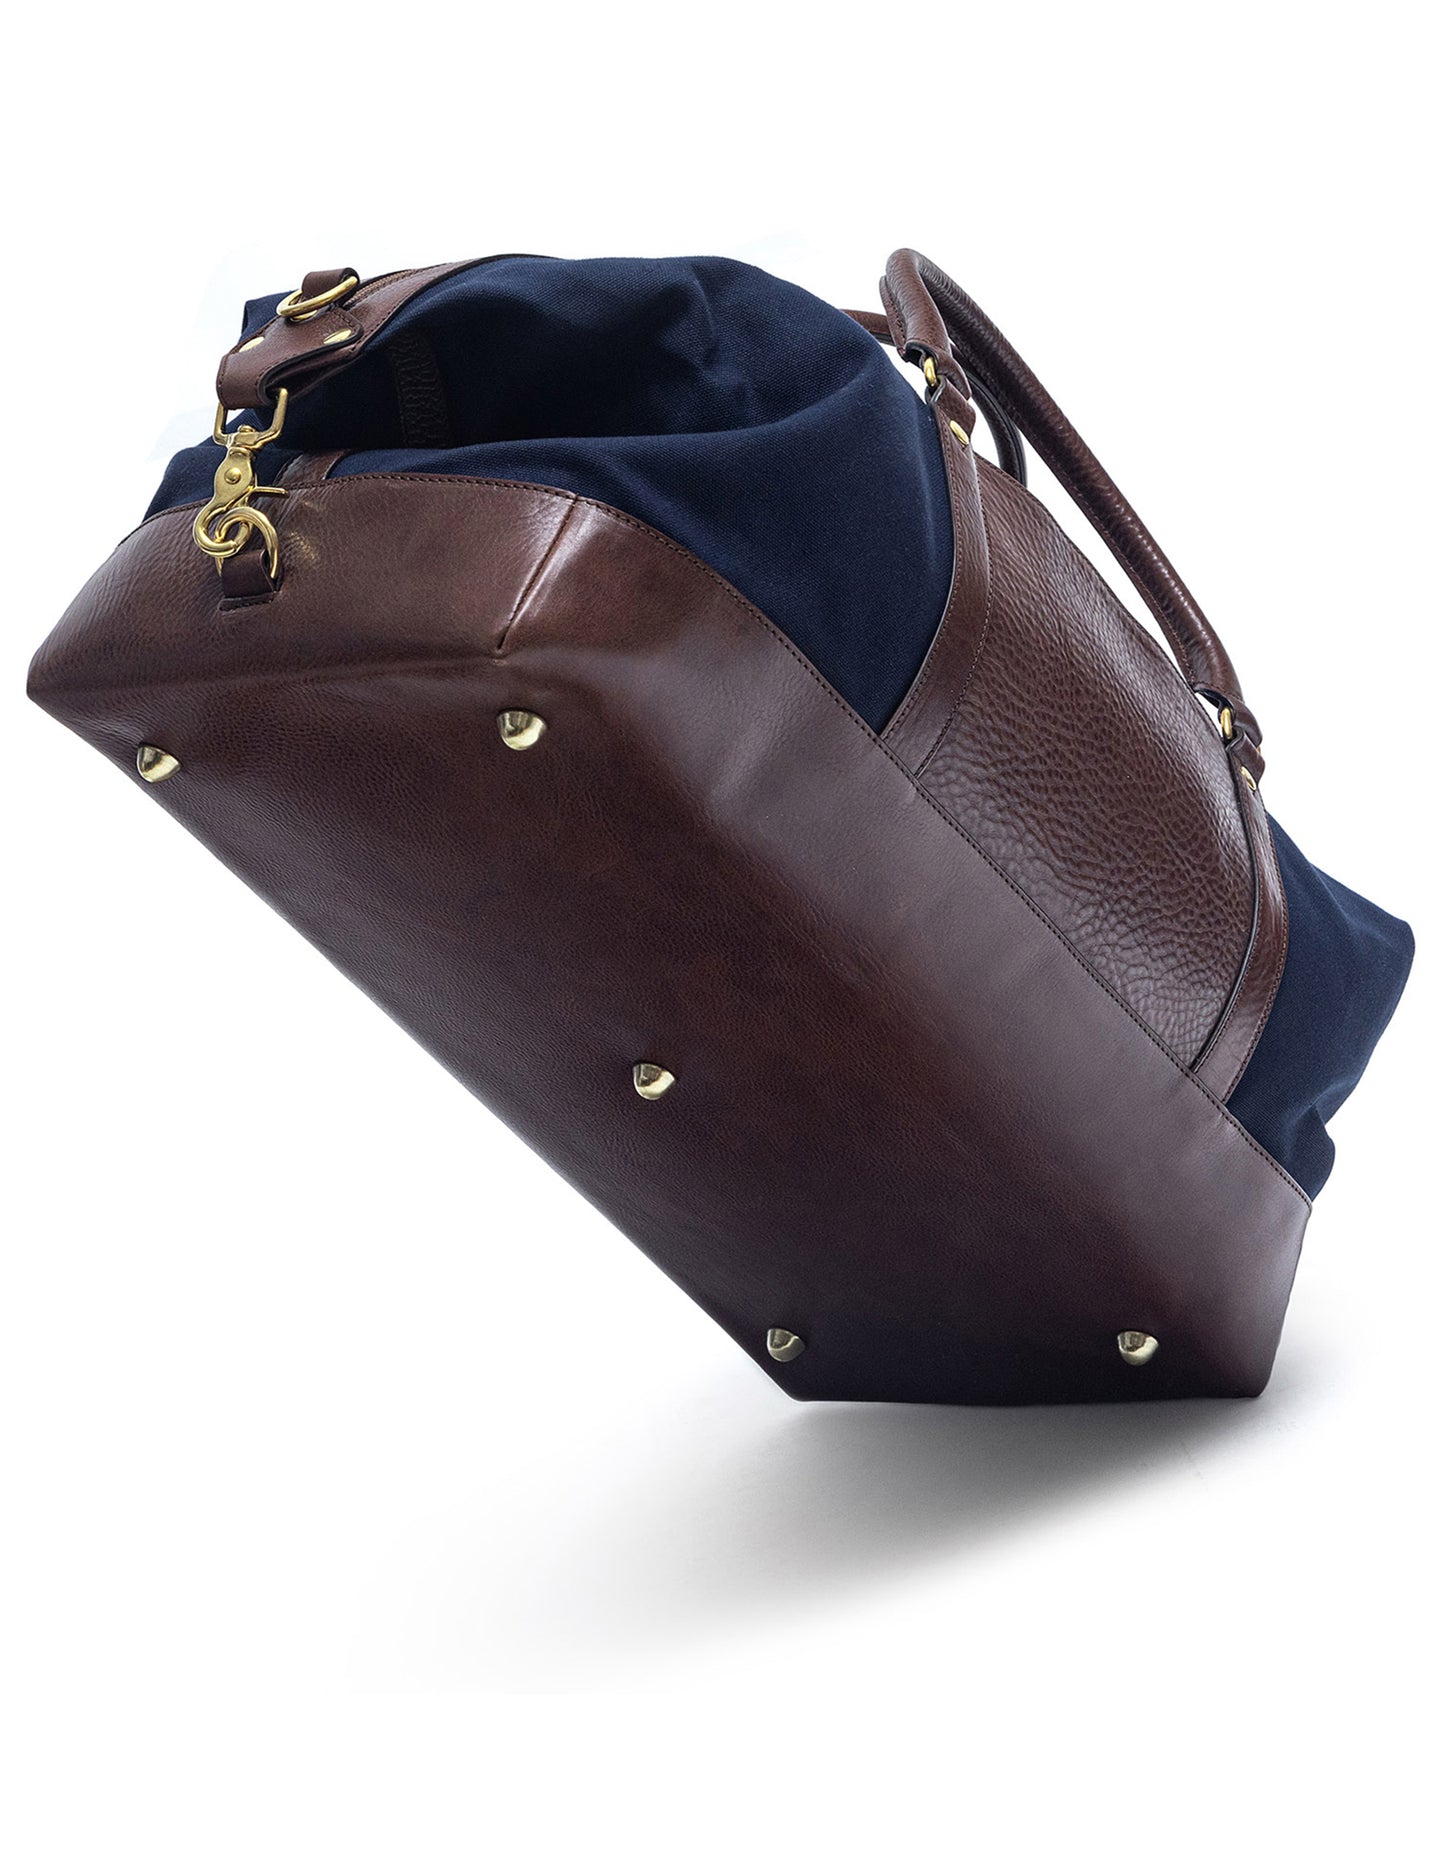 navy blue leather duffle bag